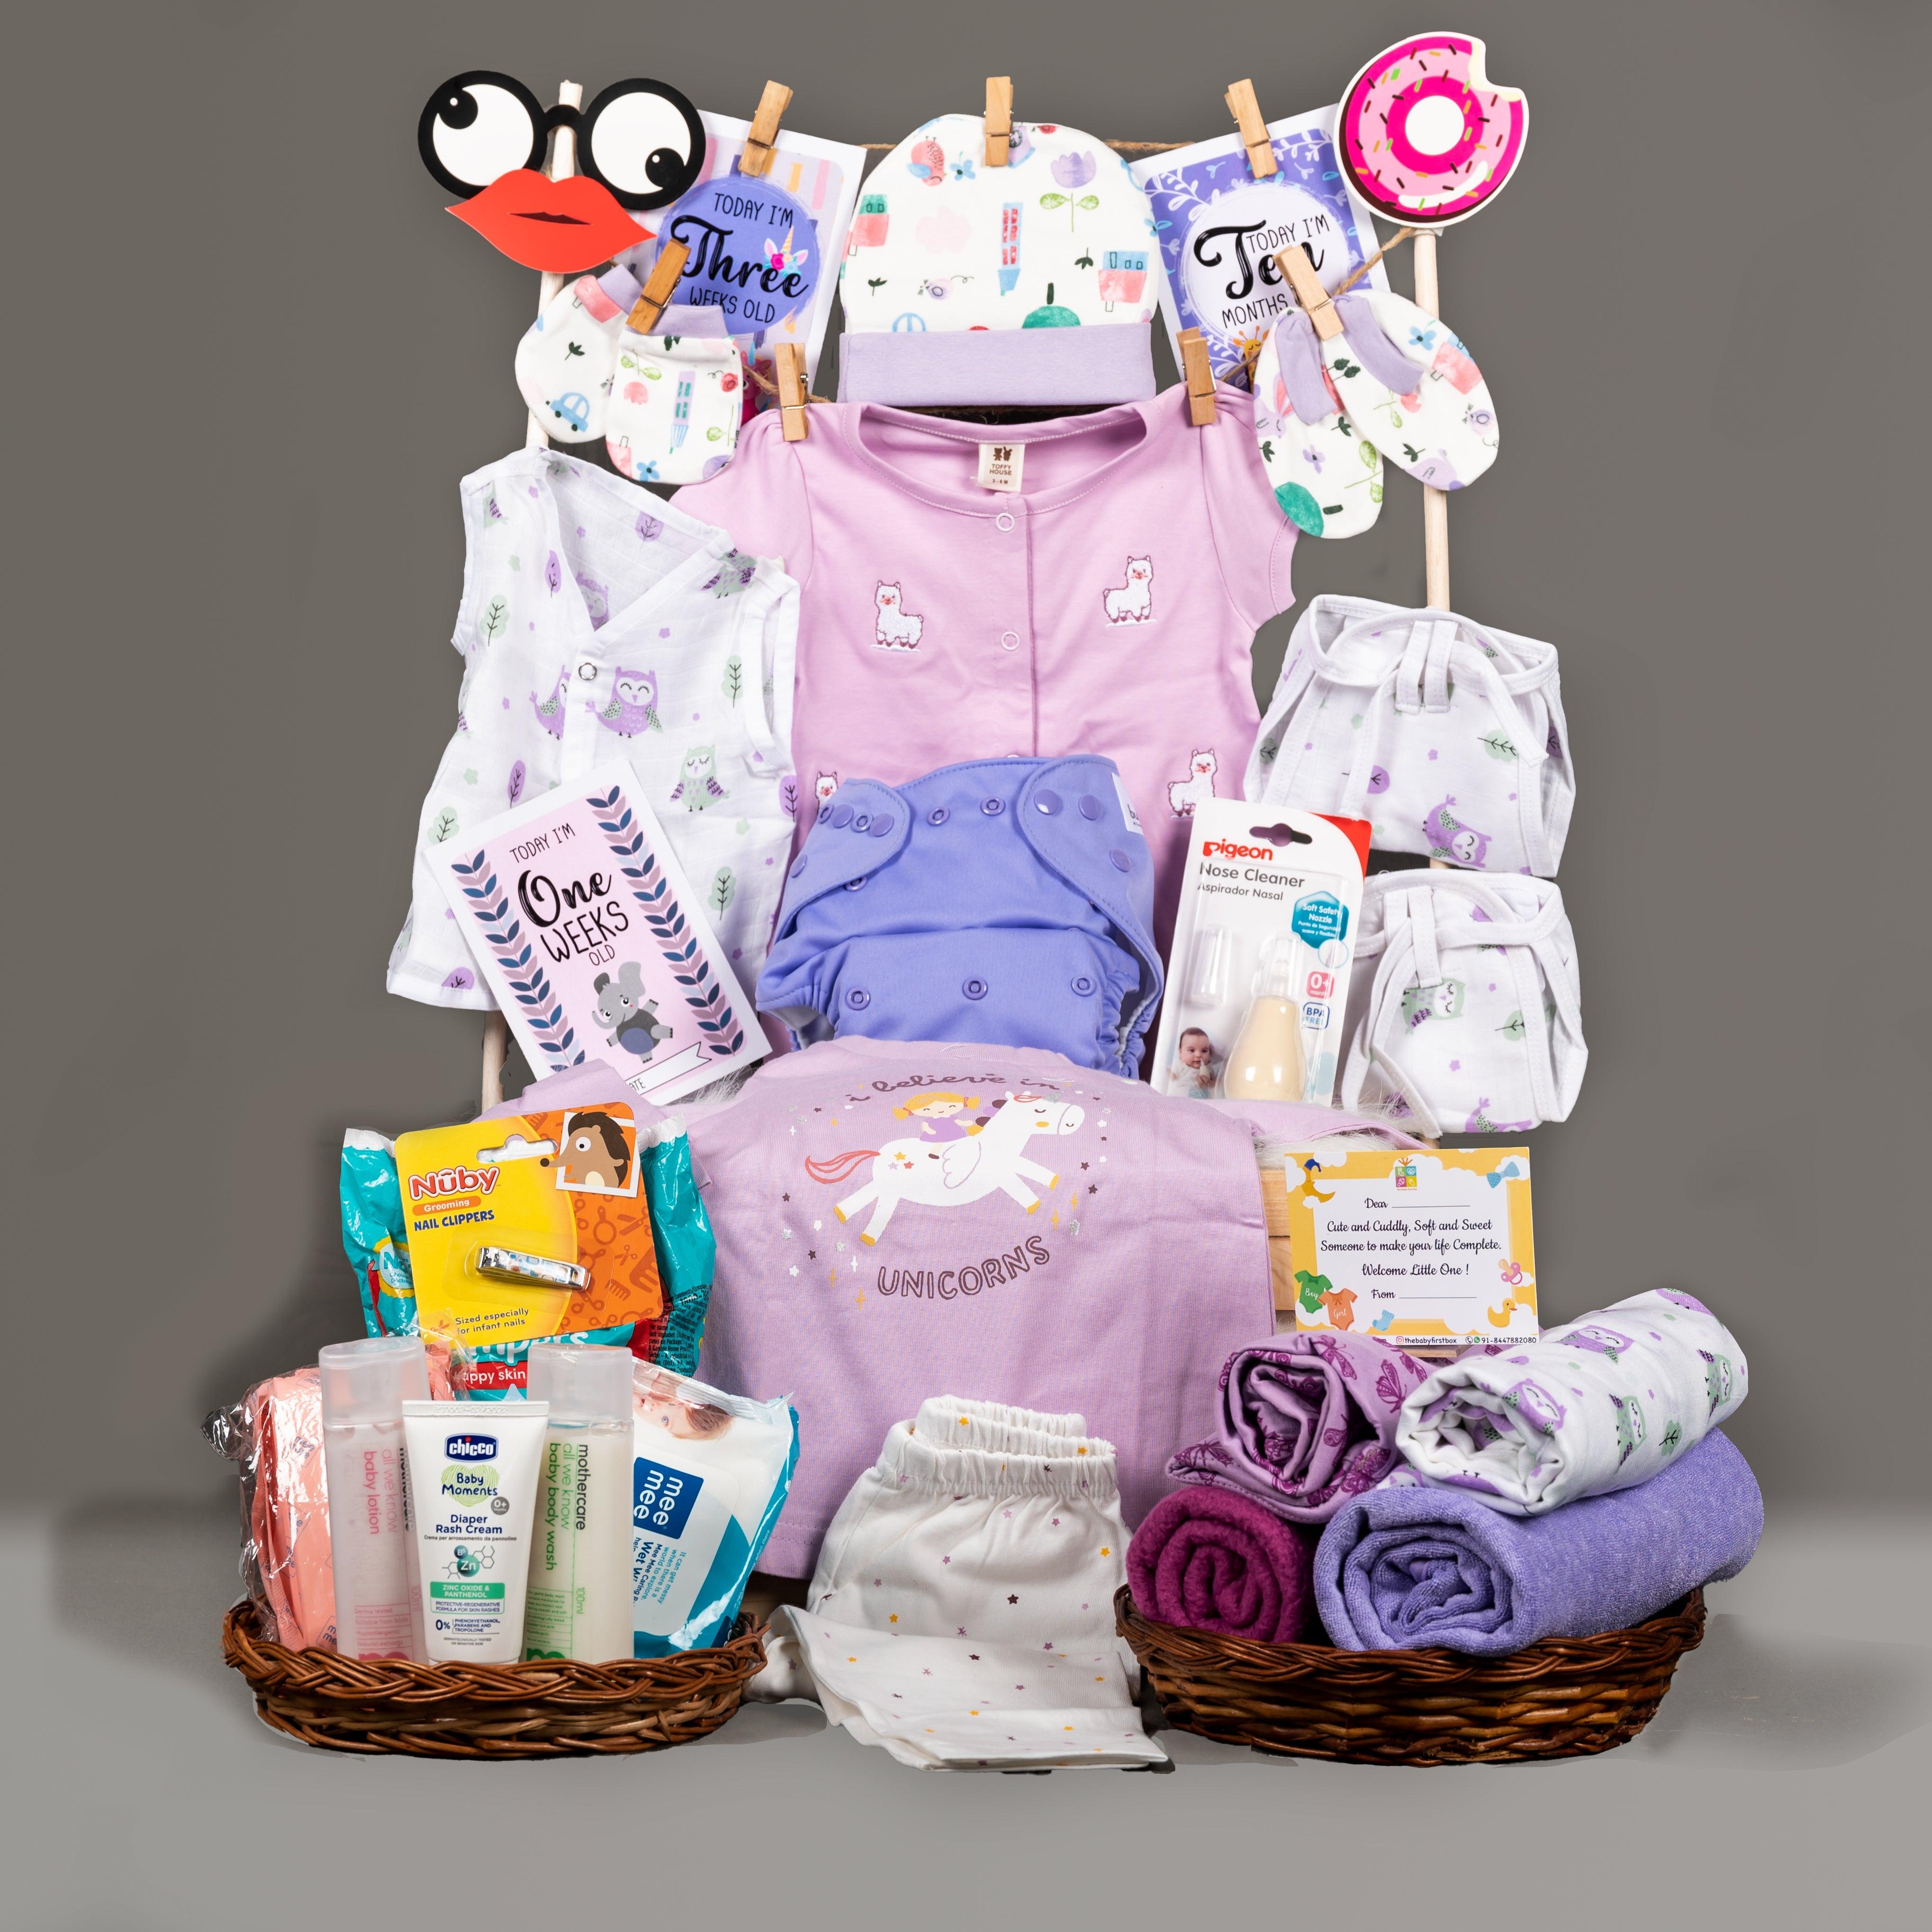 Get Well Gift Basket for Boys and Girls with Fun Things to Do for